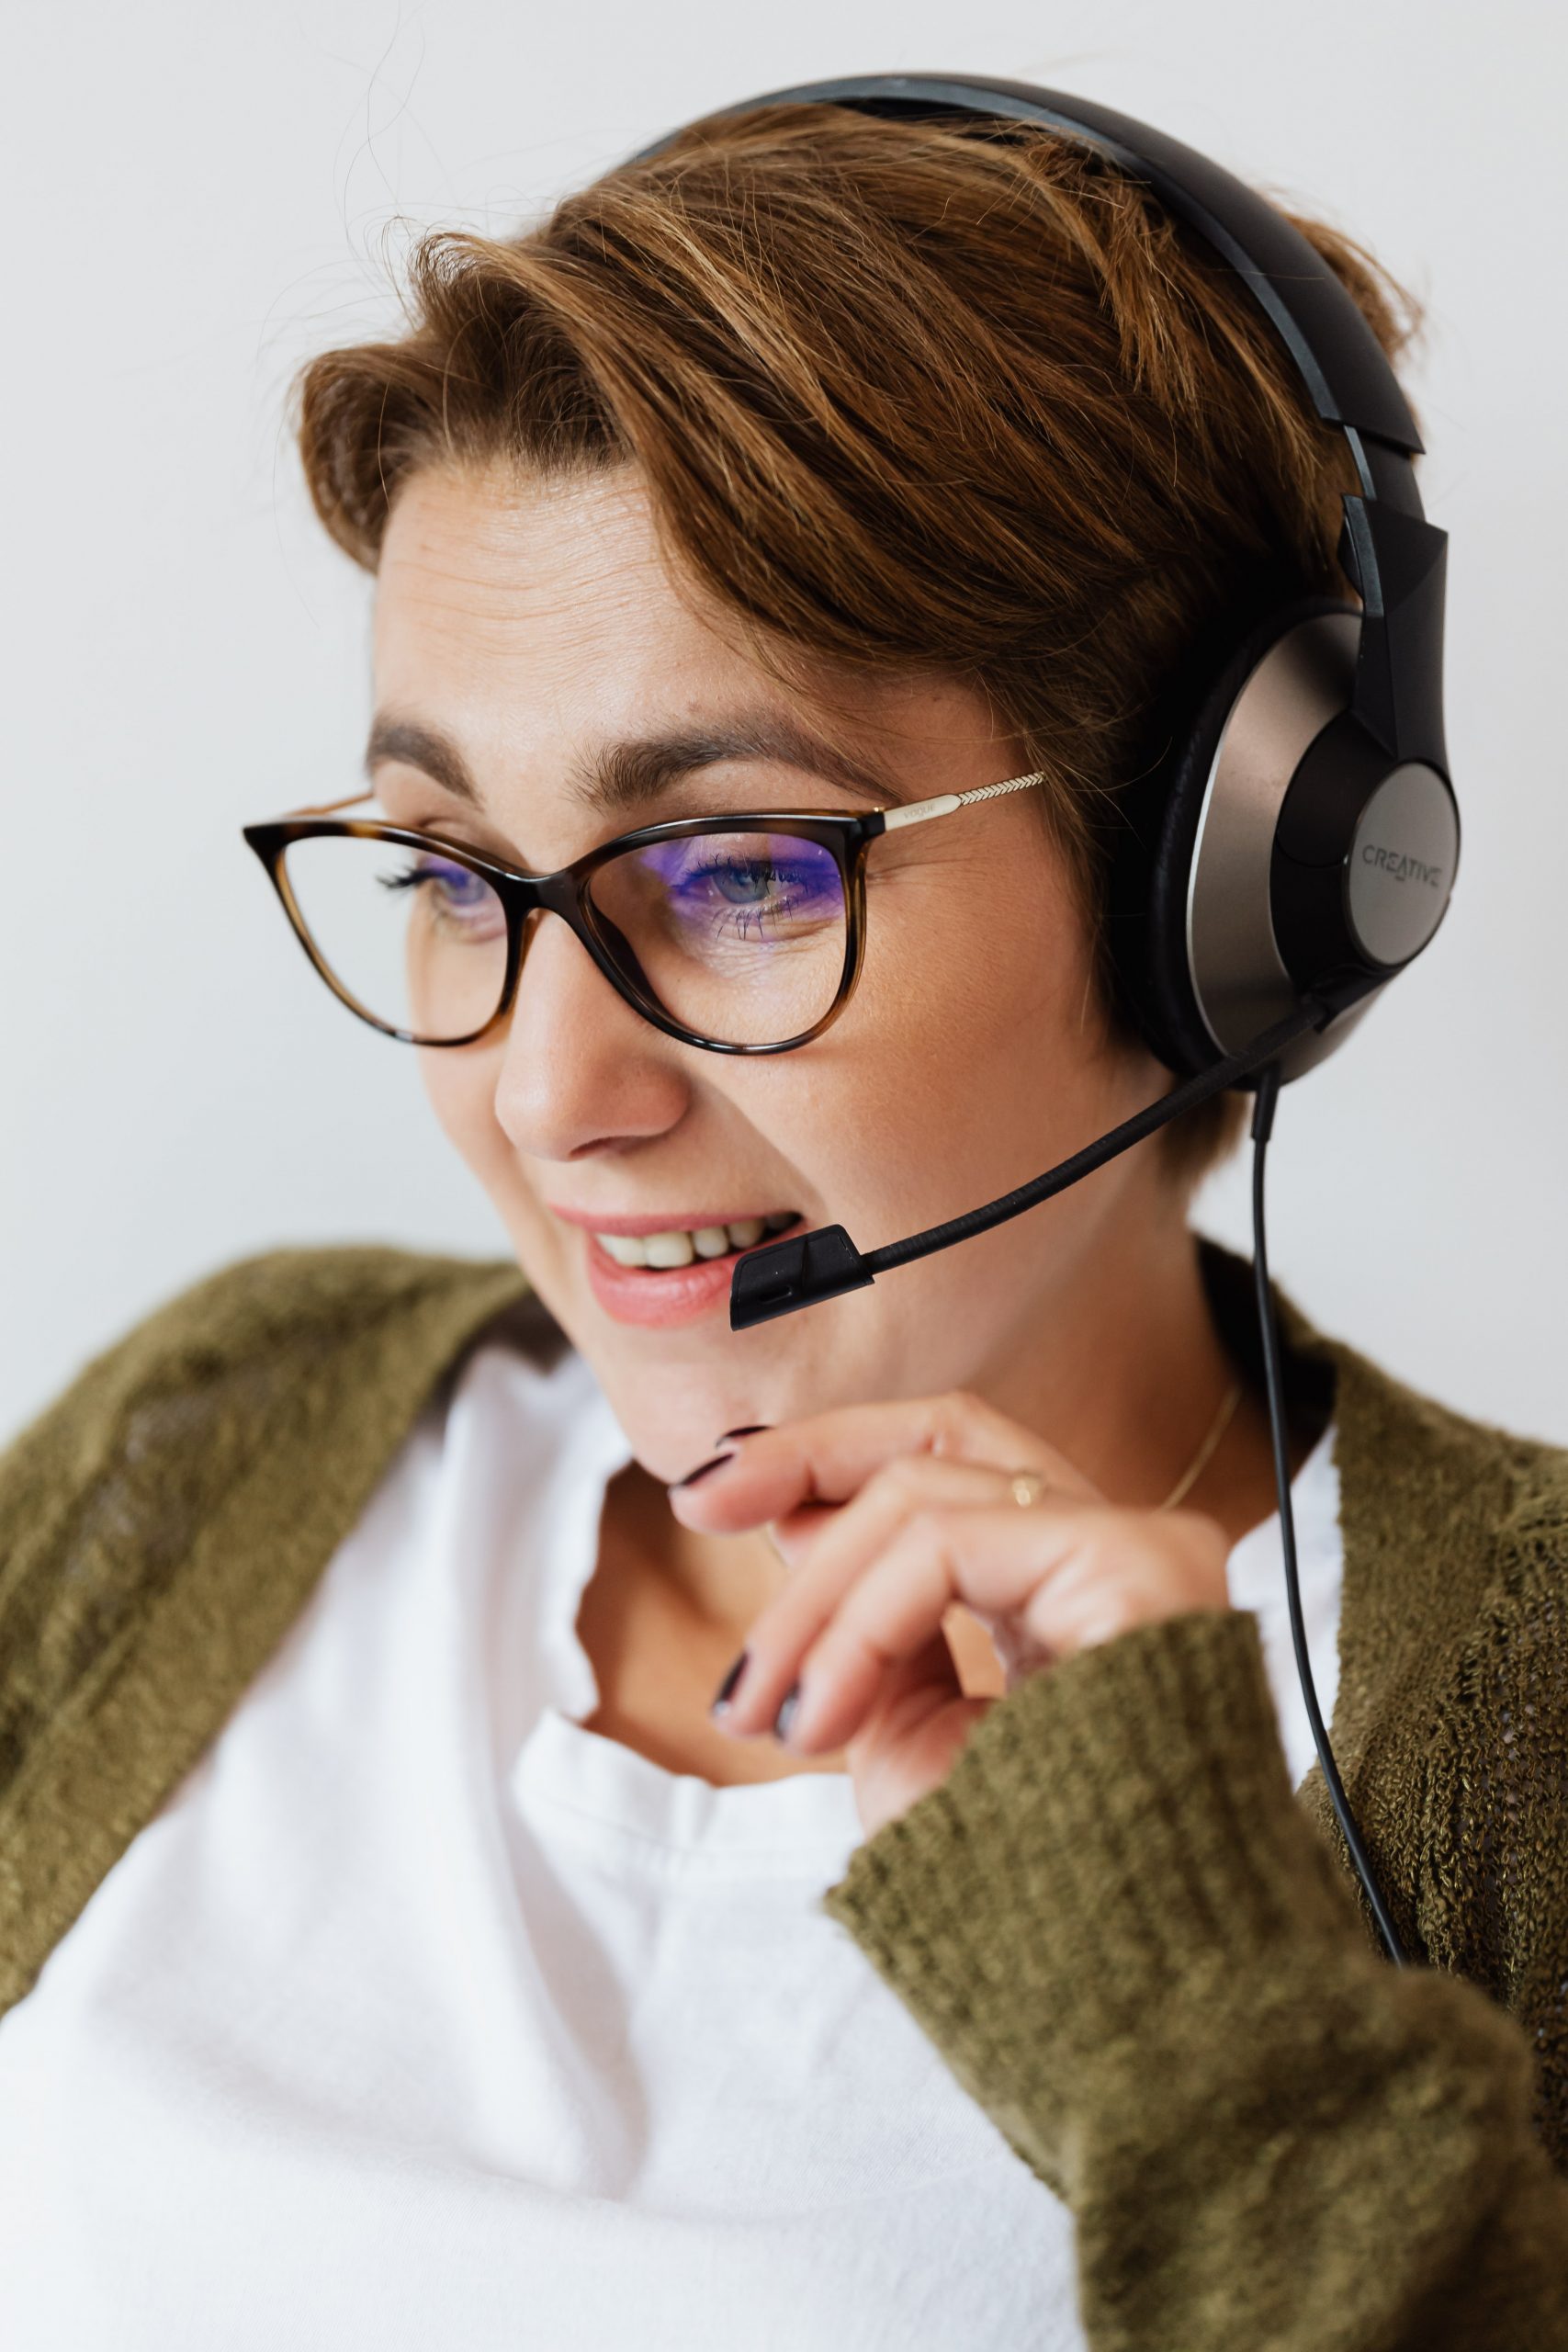 Telemarketing Compliance For Educational Institutions